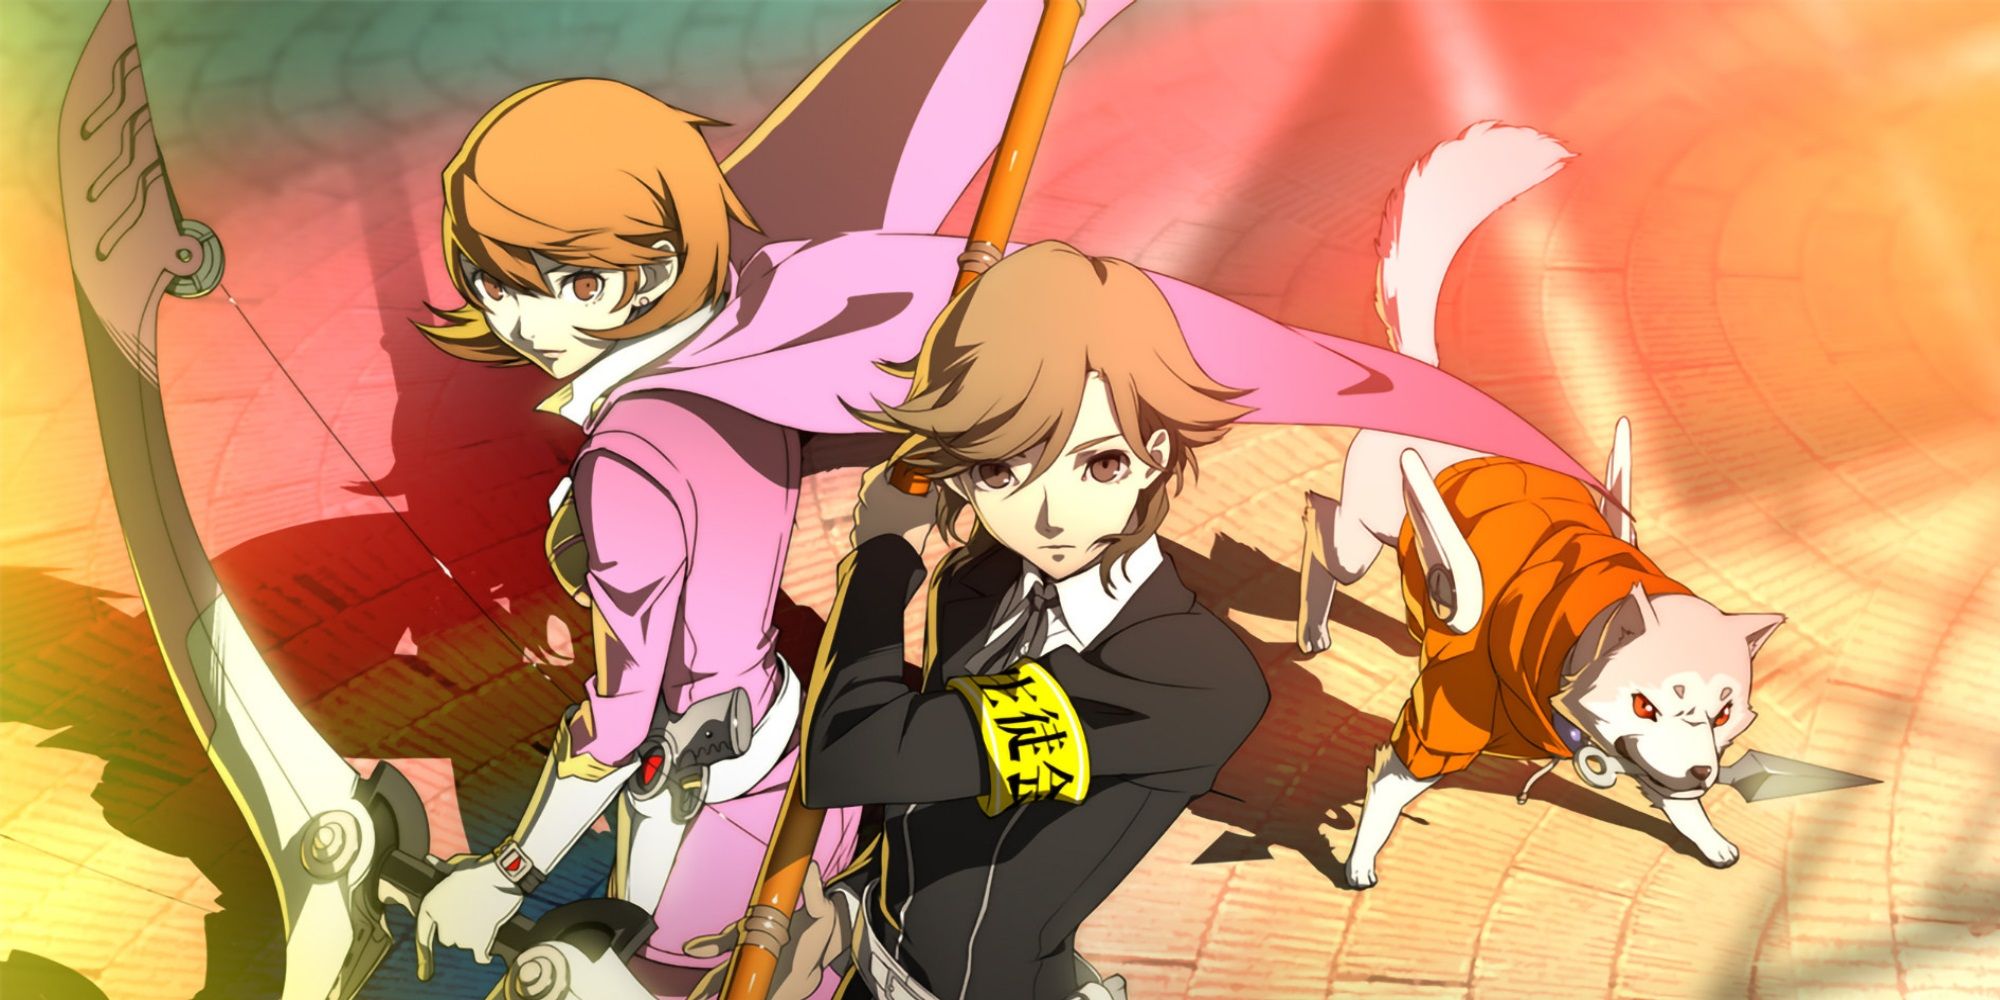 Persona 4 Arena - Two characters and a dog.